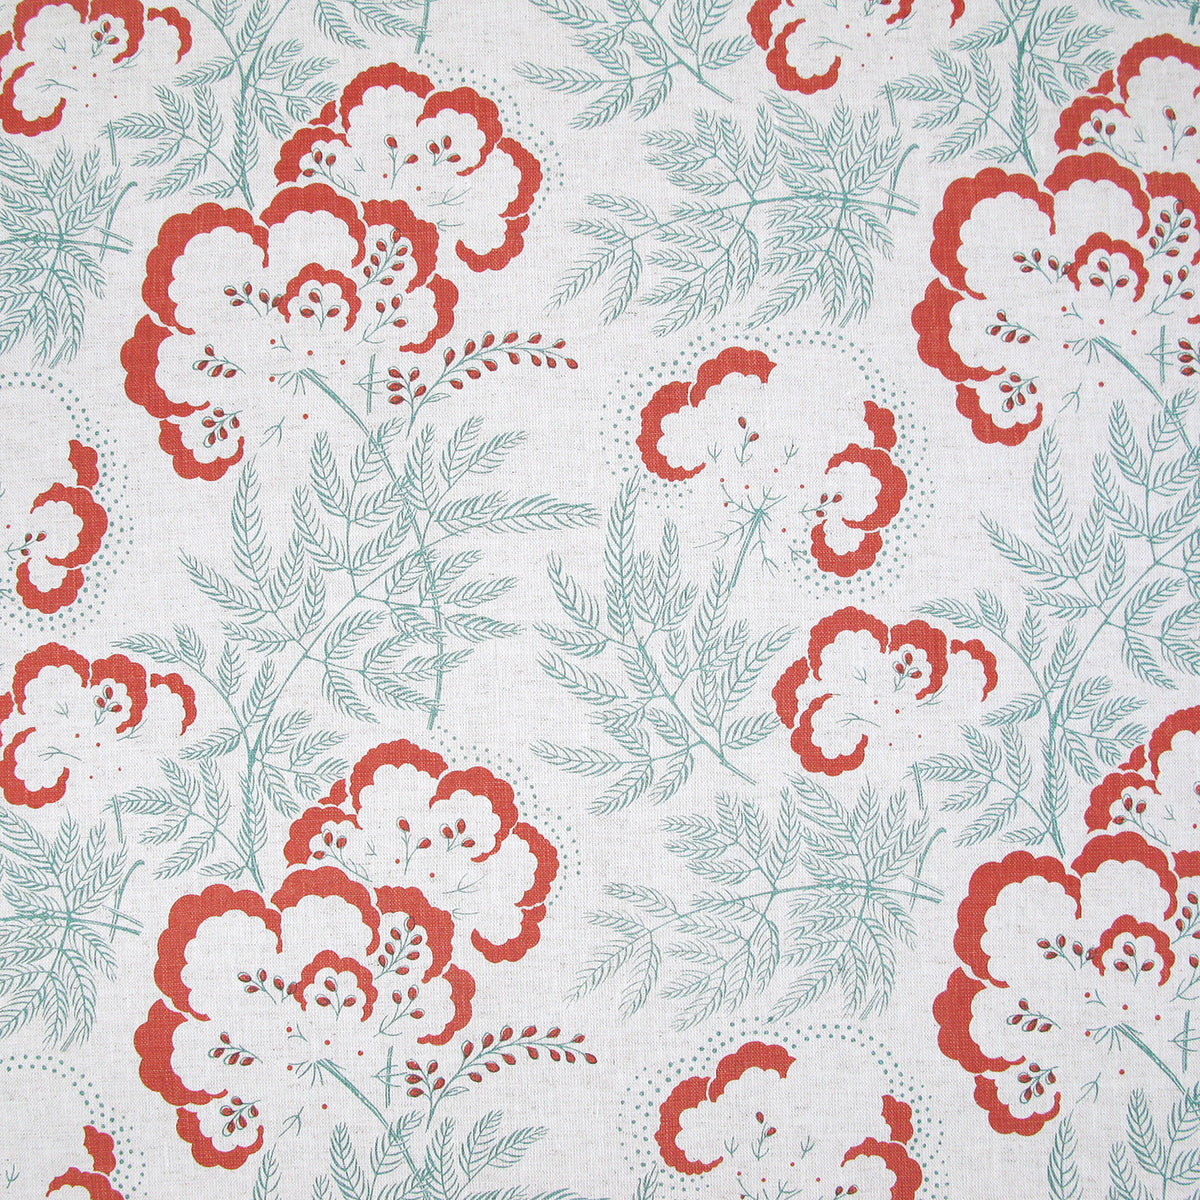 Detail of fabric in an intricate floral print in red and turquoise on a white field.